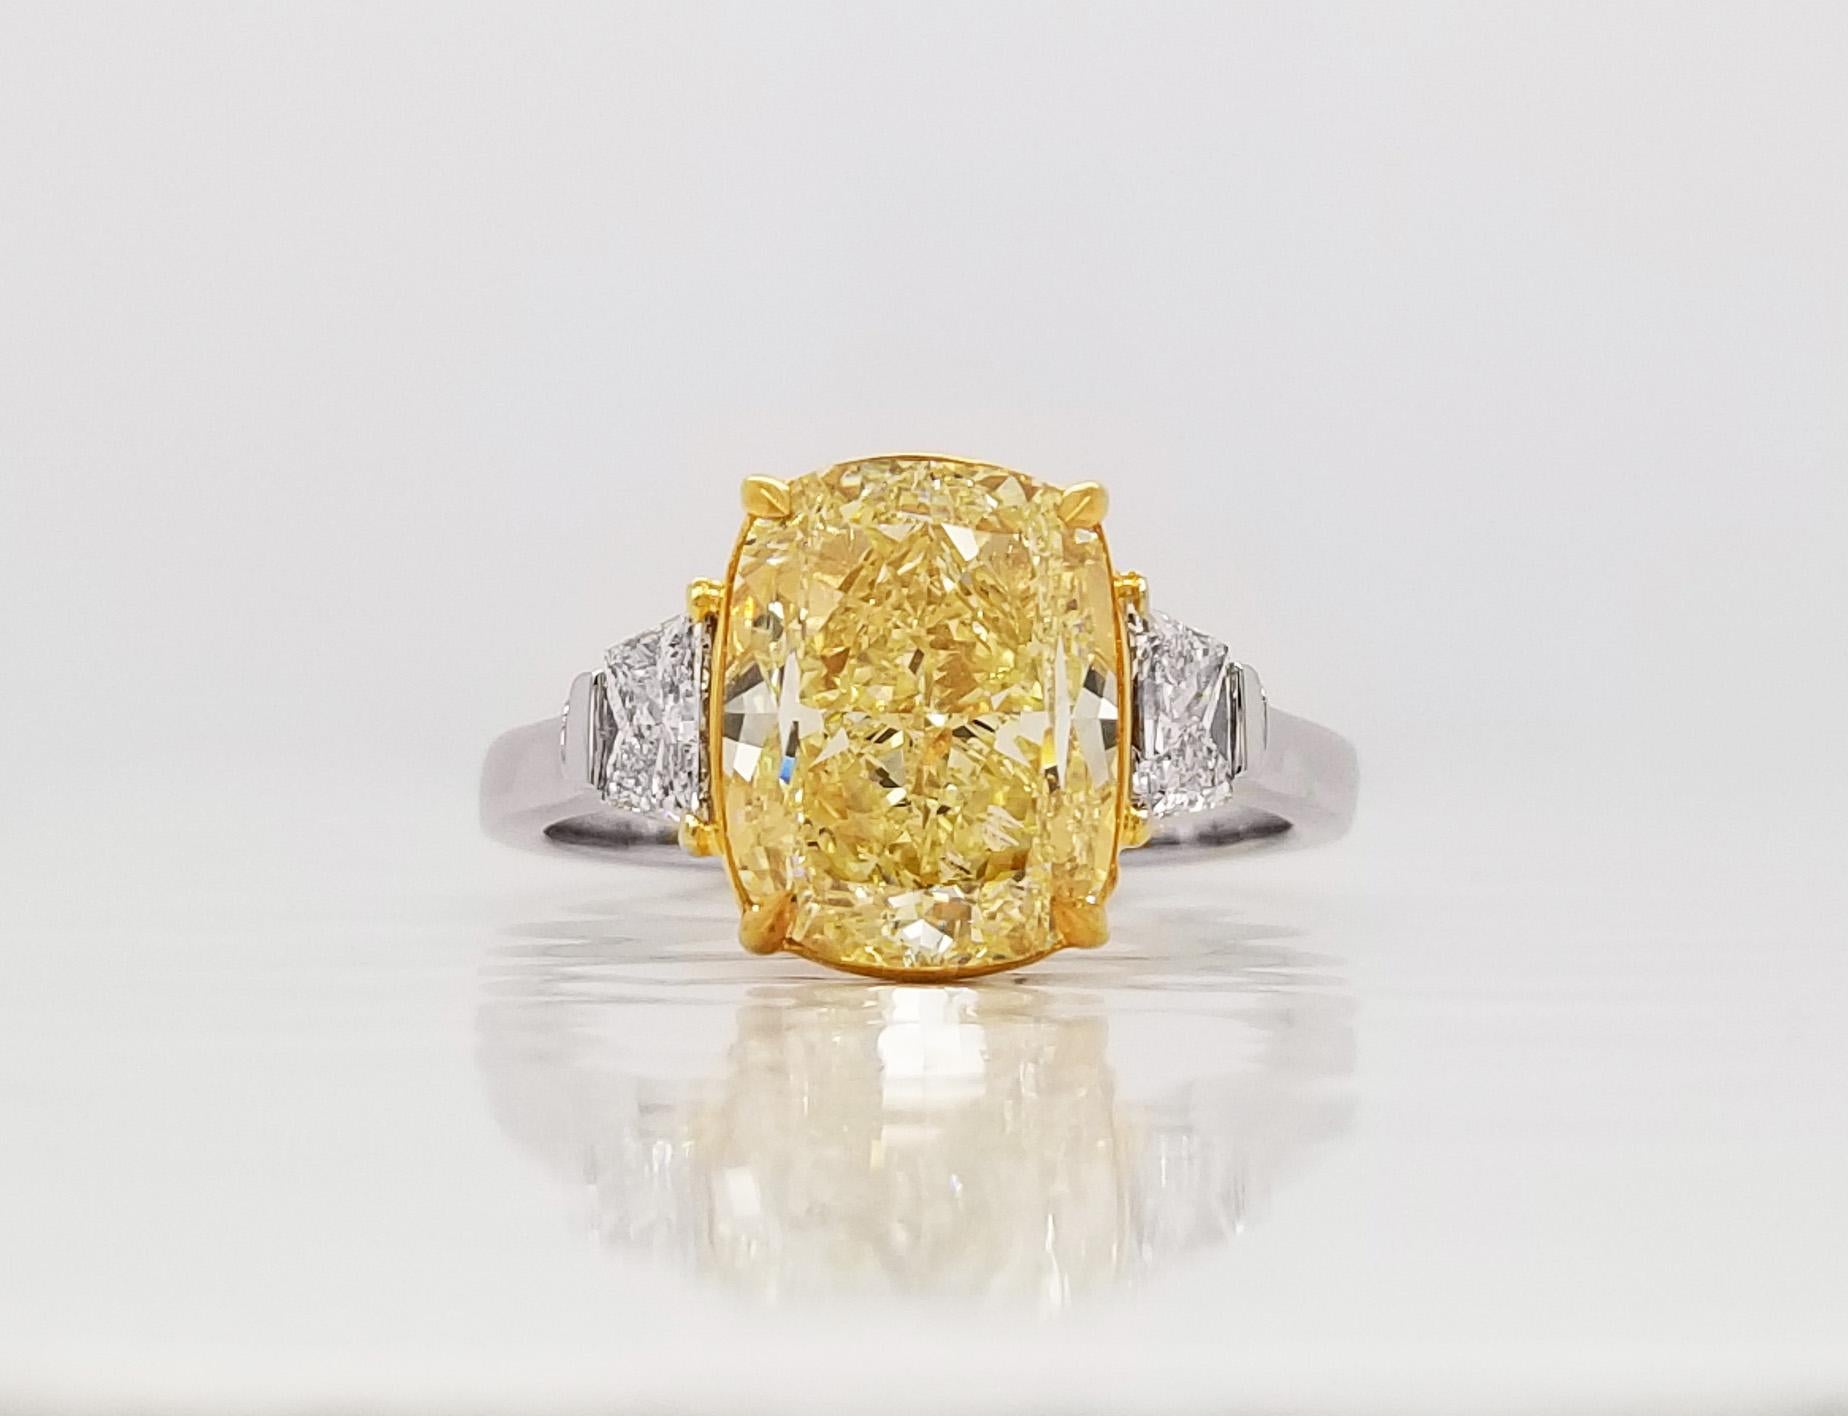 Contemporary Scarselli 4 Carat Fancy Yellow Cushion Cut Diamond Engagement Ring